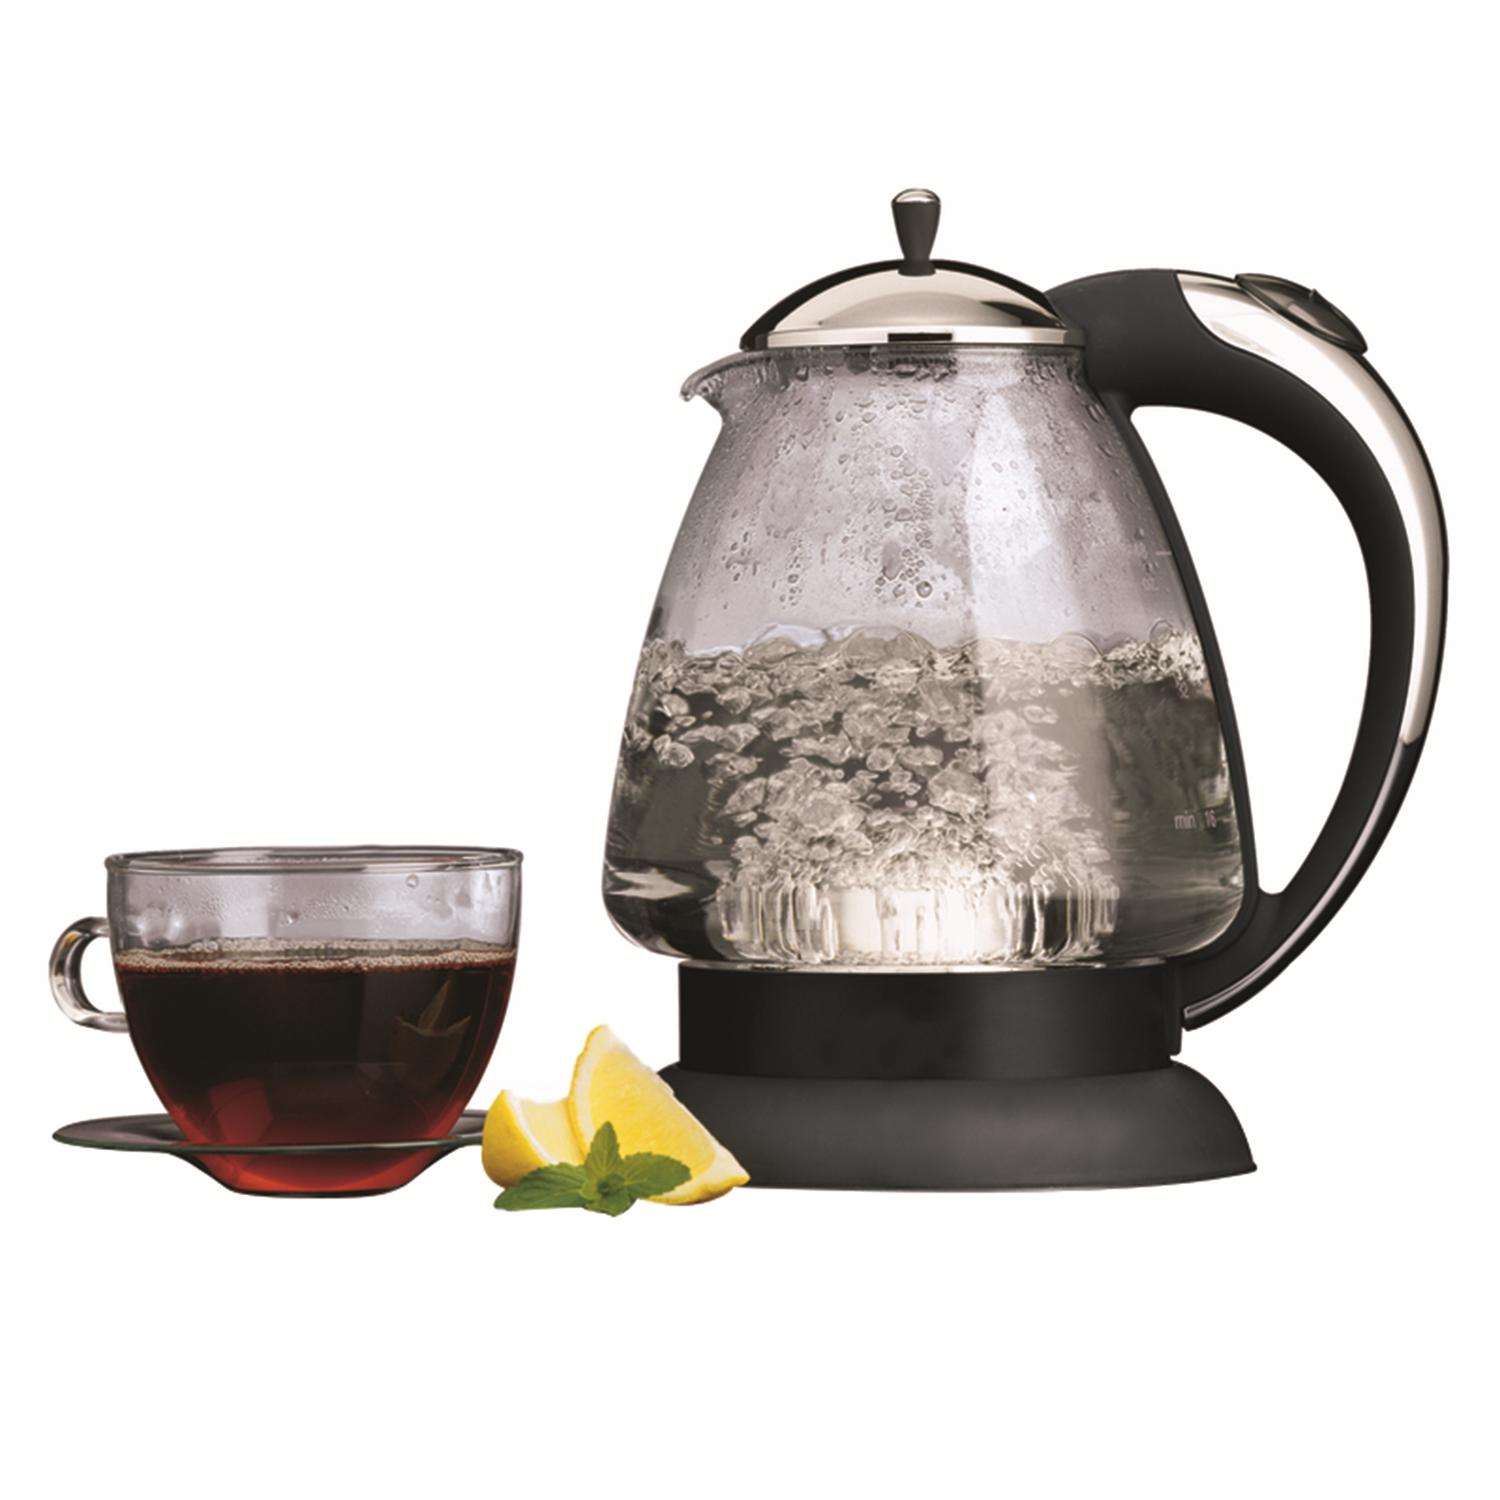 Unique Touch All Black Glass Tray Electric Kettle Set - 3pc